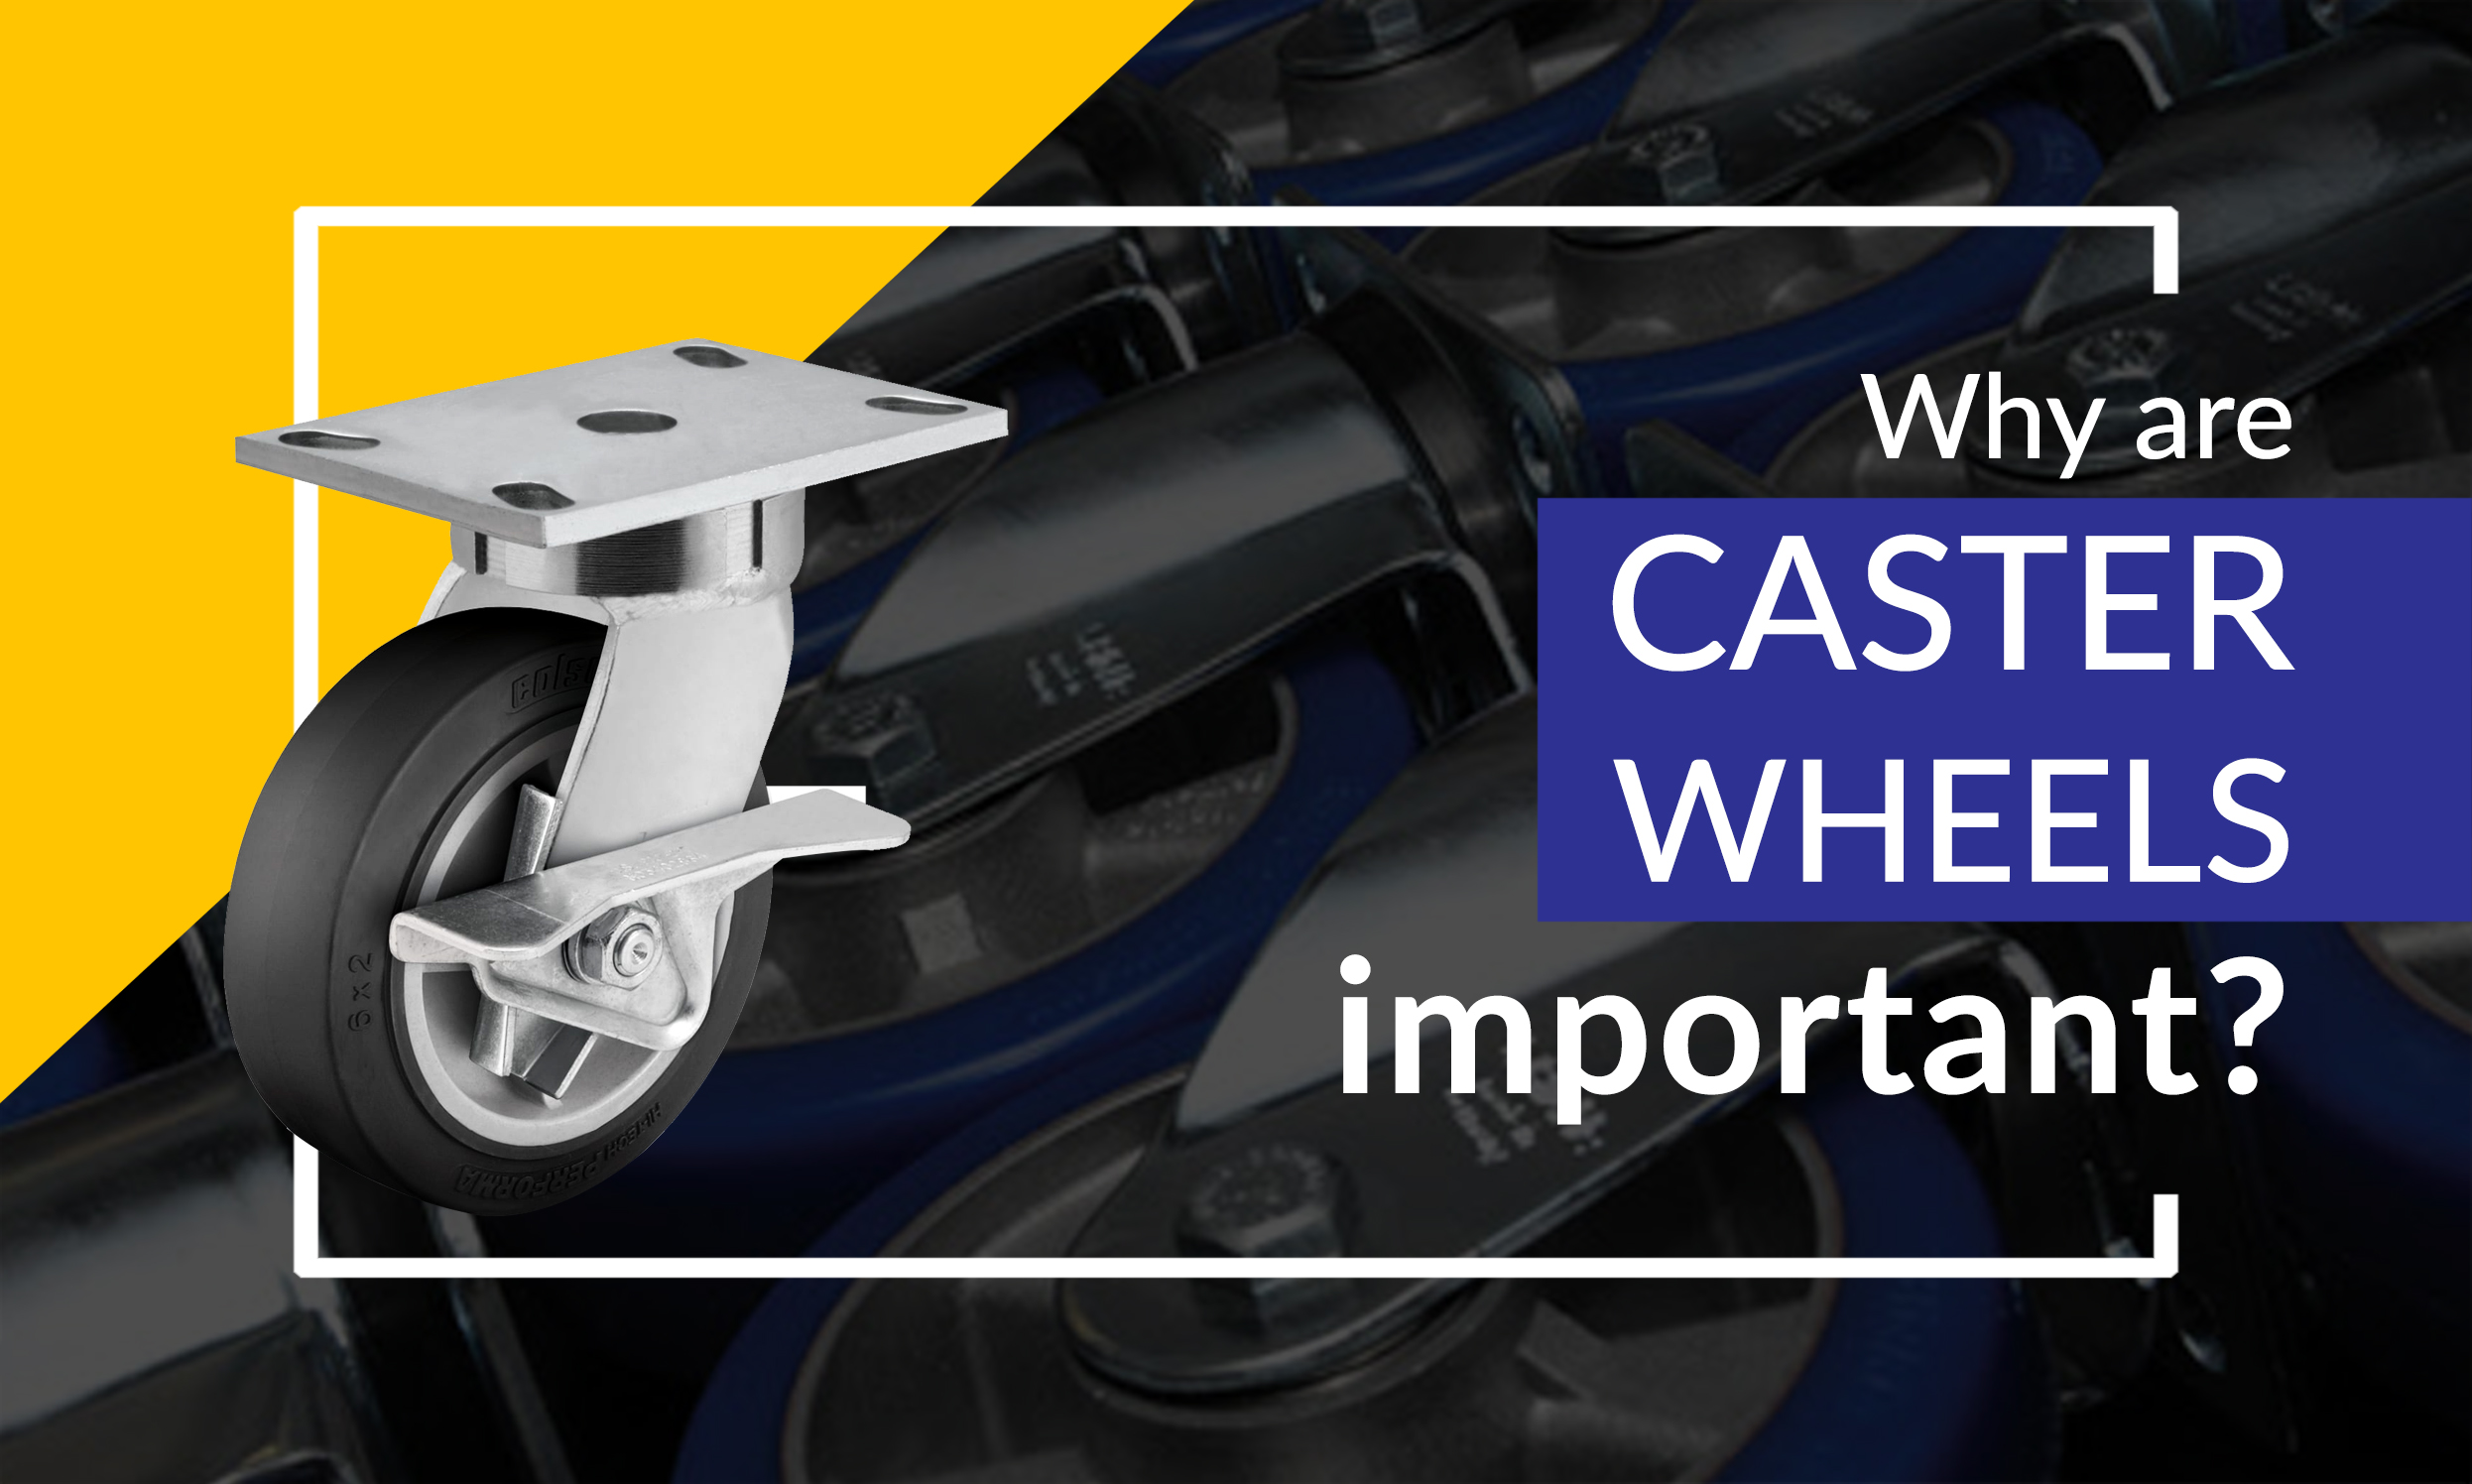 Why are caster wheels important?